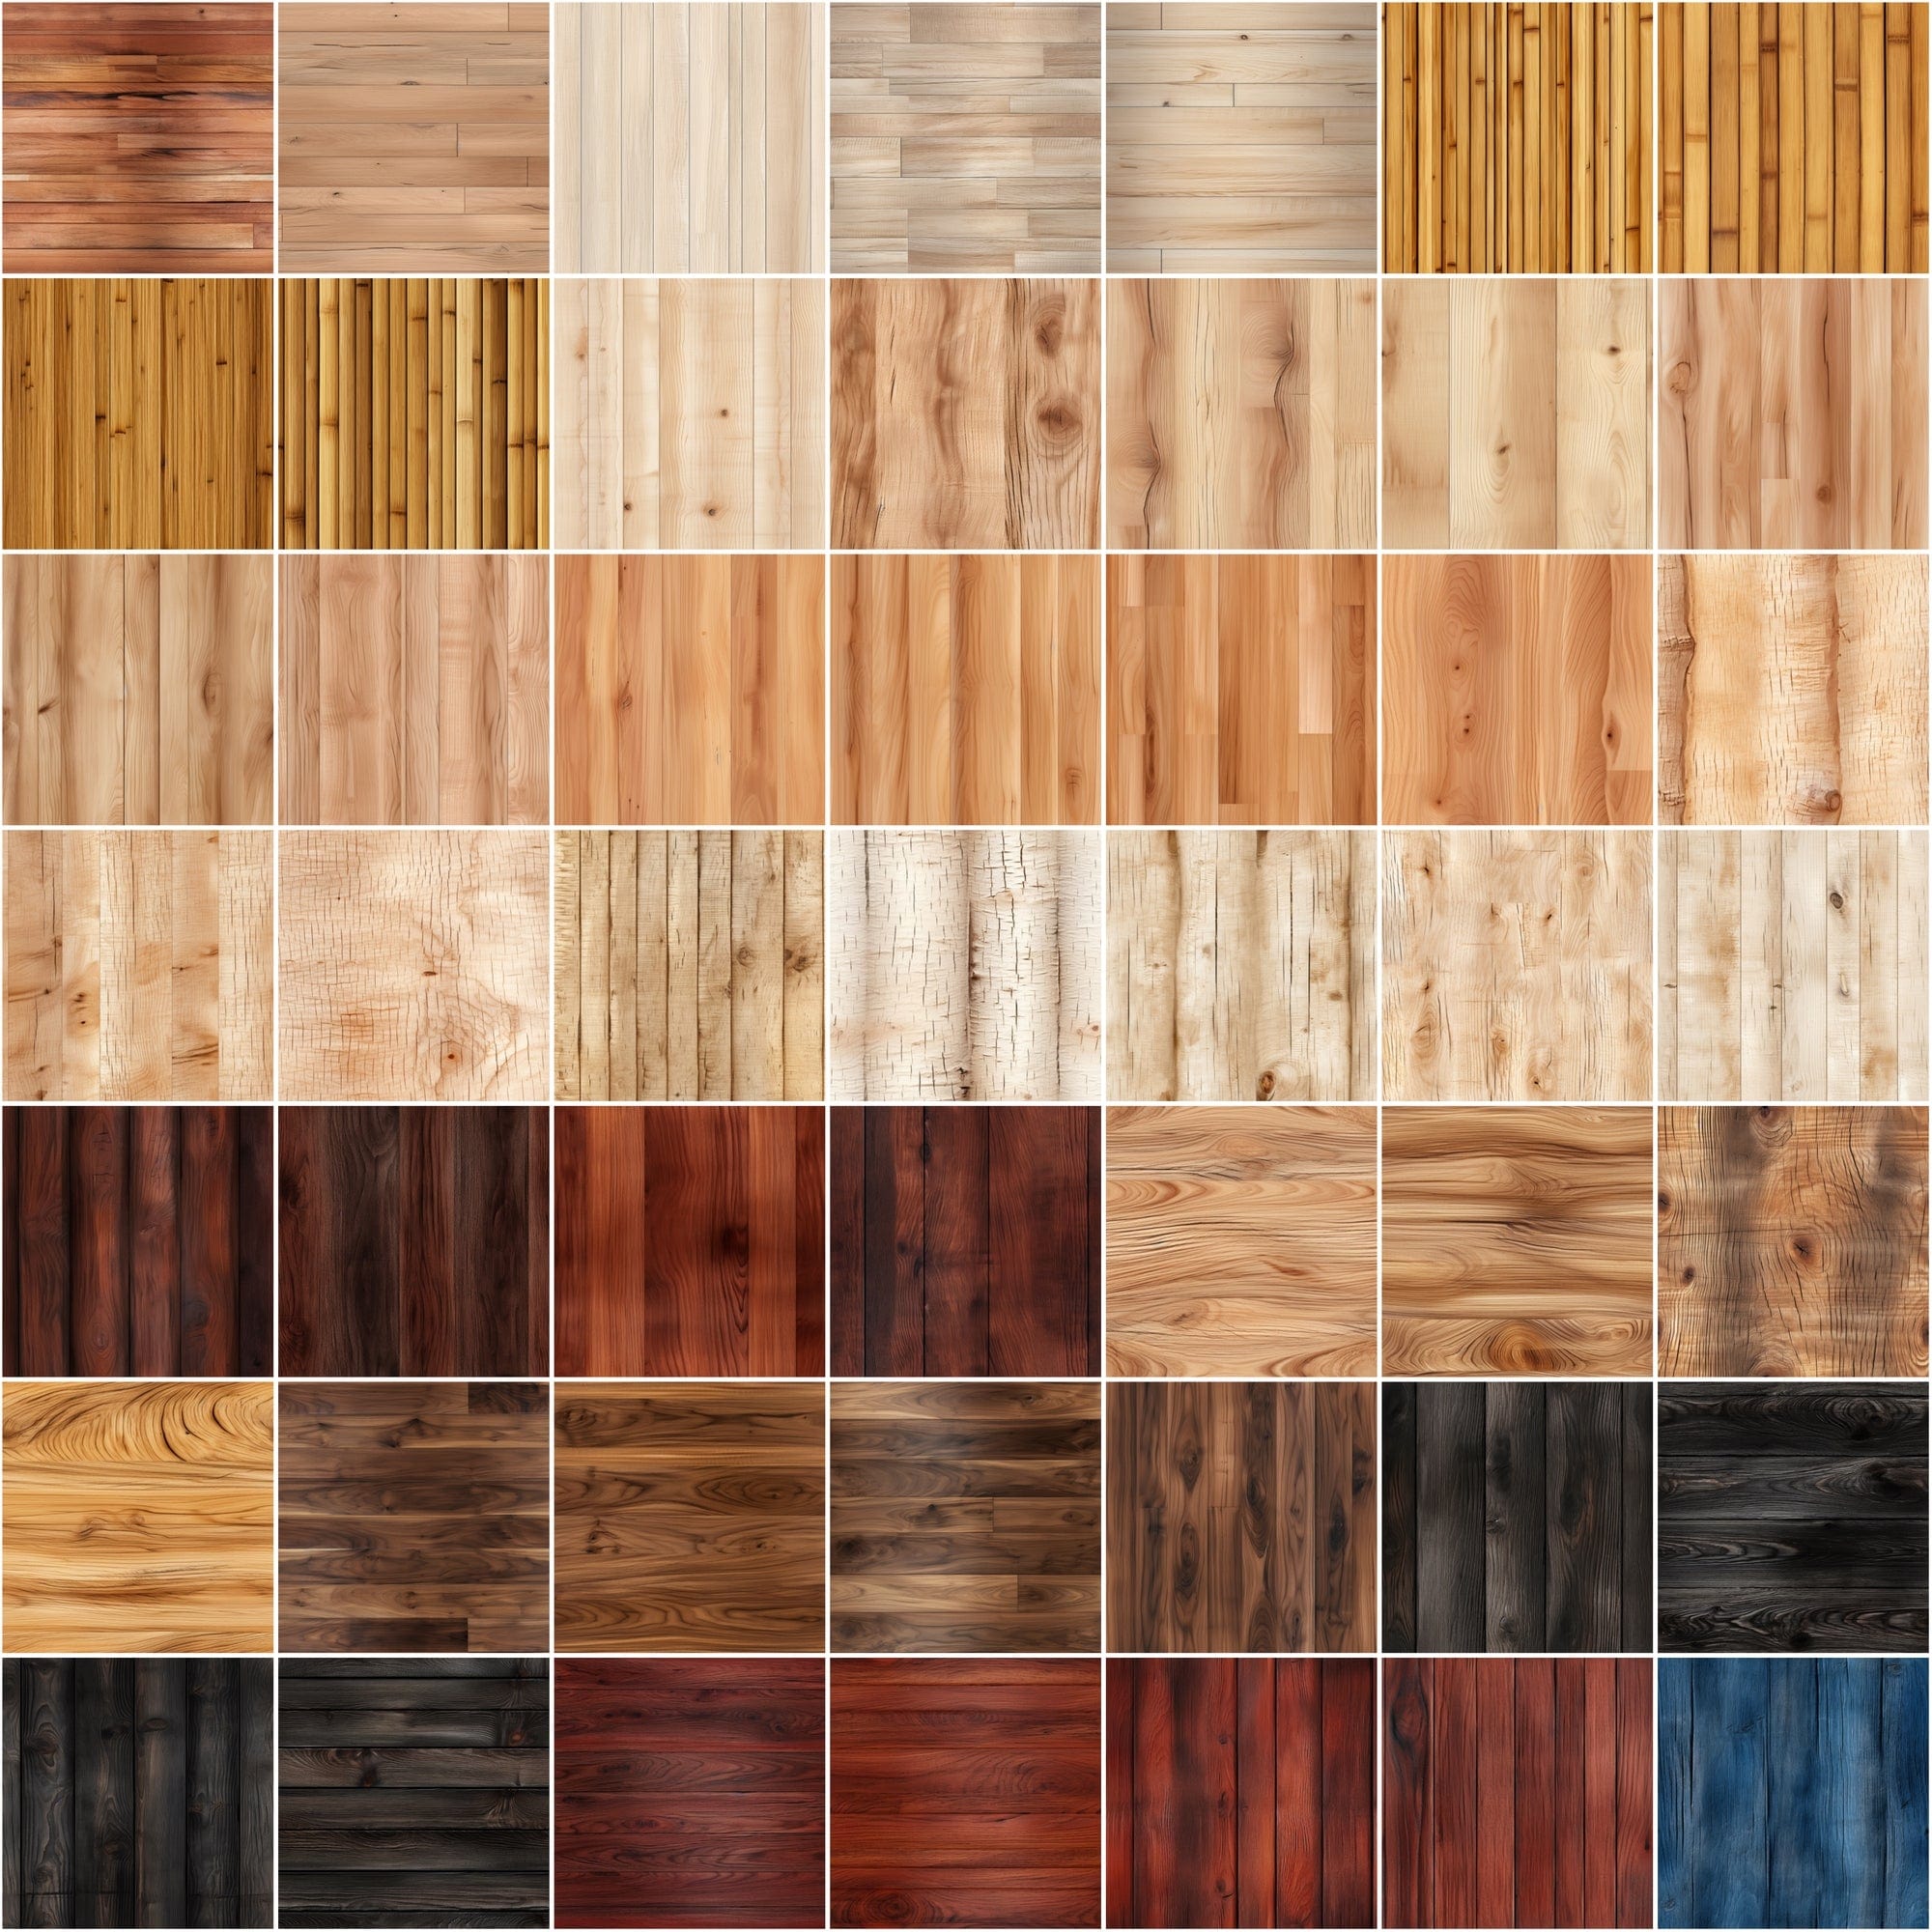 580 Seamless Wood Backgrounds & Photoshop Patterns Bundle - High-Resolution Images and .pat Files with Commercial License Sumobundle